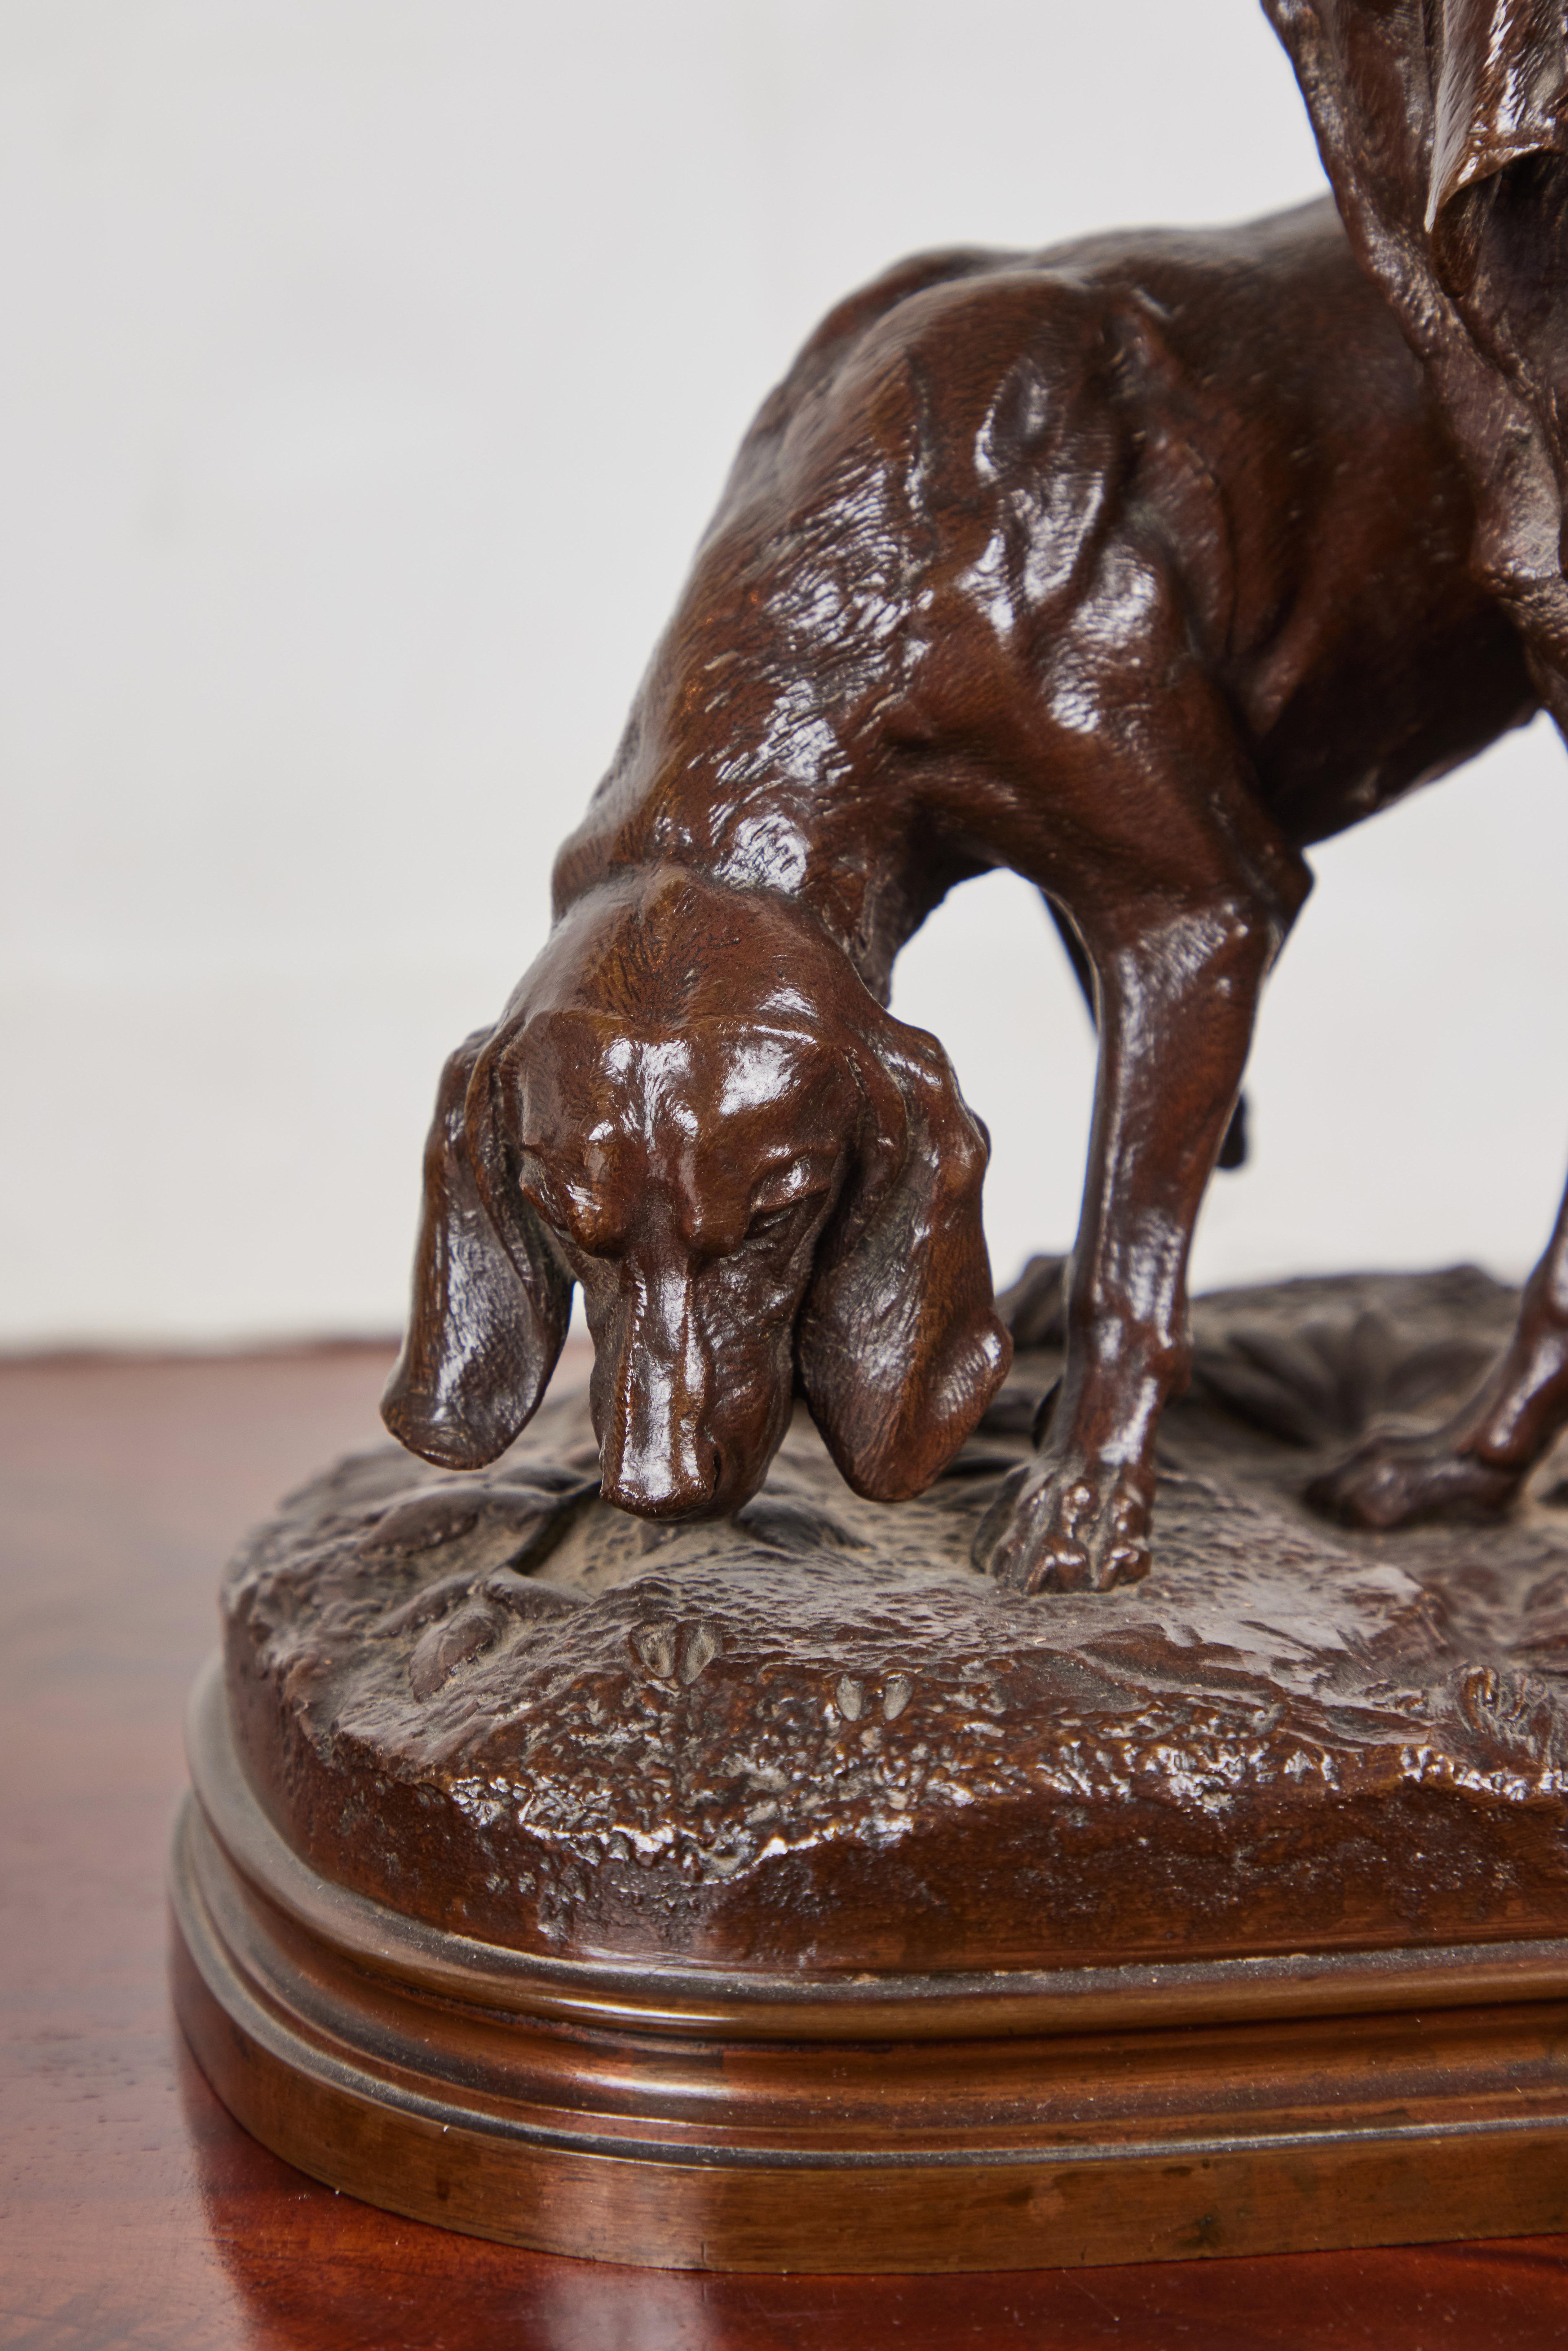 A lively, beautifully cast, patinated bronze sculpture of two hounds on a lush forest floor by listed French artist, Alfred Dubucand (1828-1894).

A proponent of Romantic Realism,  Dubucand was a prize pupil of the renowned founder of the French